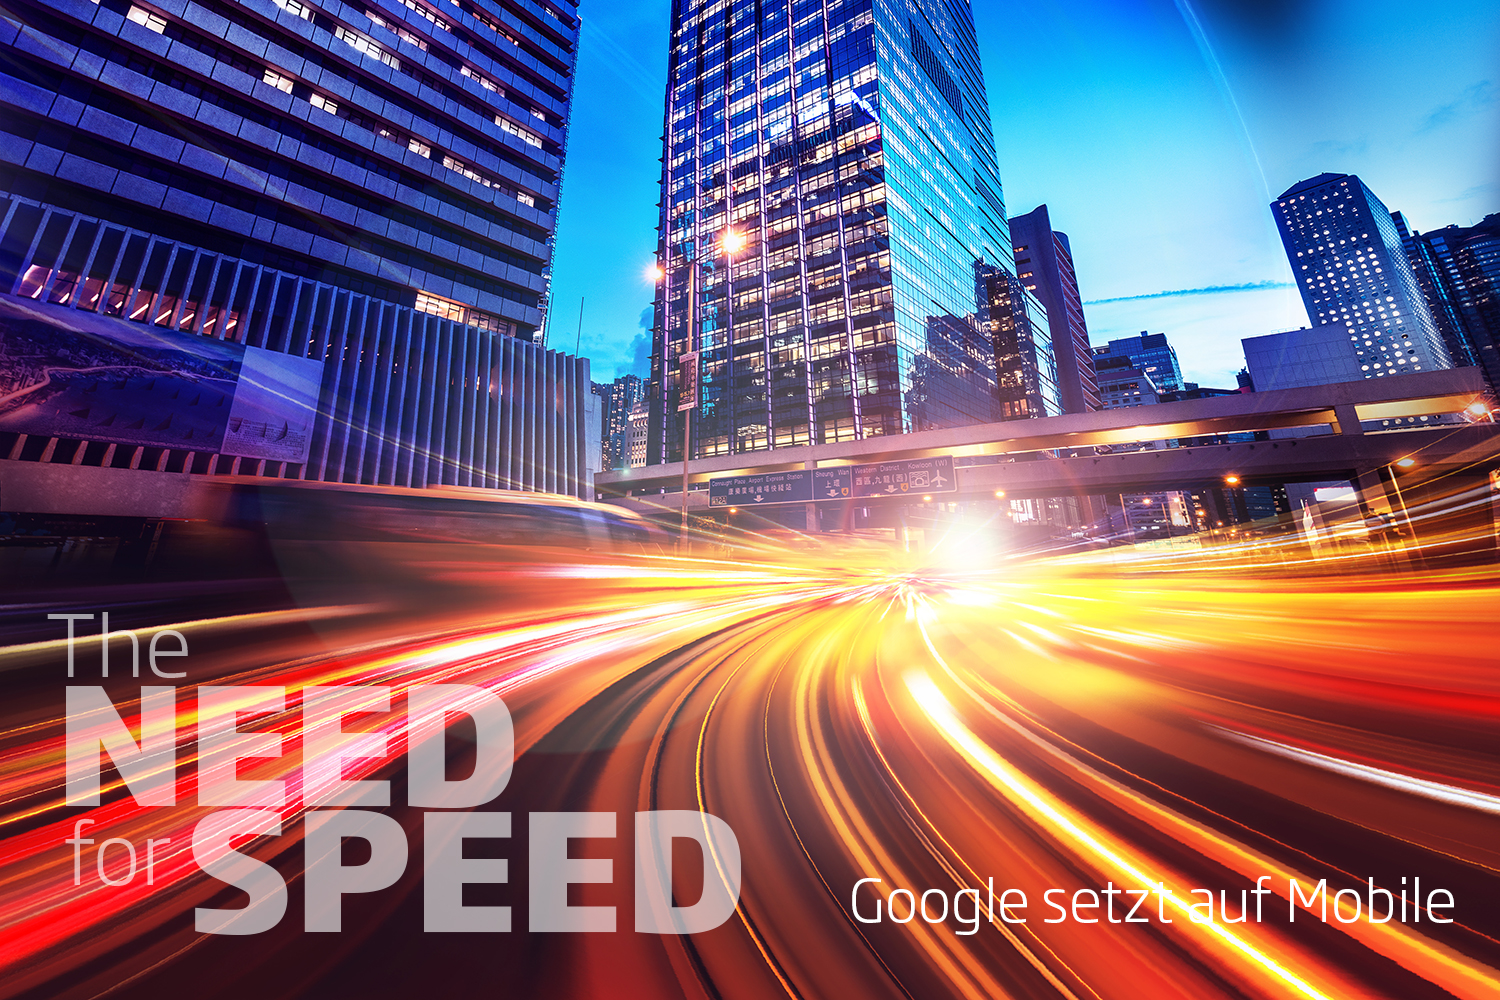 The Need for Speed. Der neue Google Mobile Index.